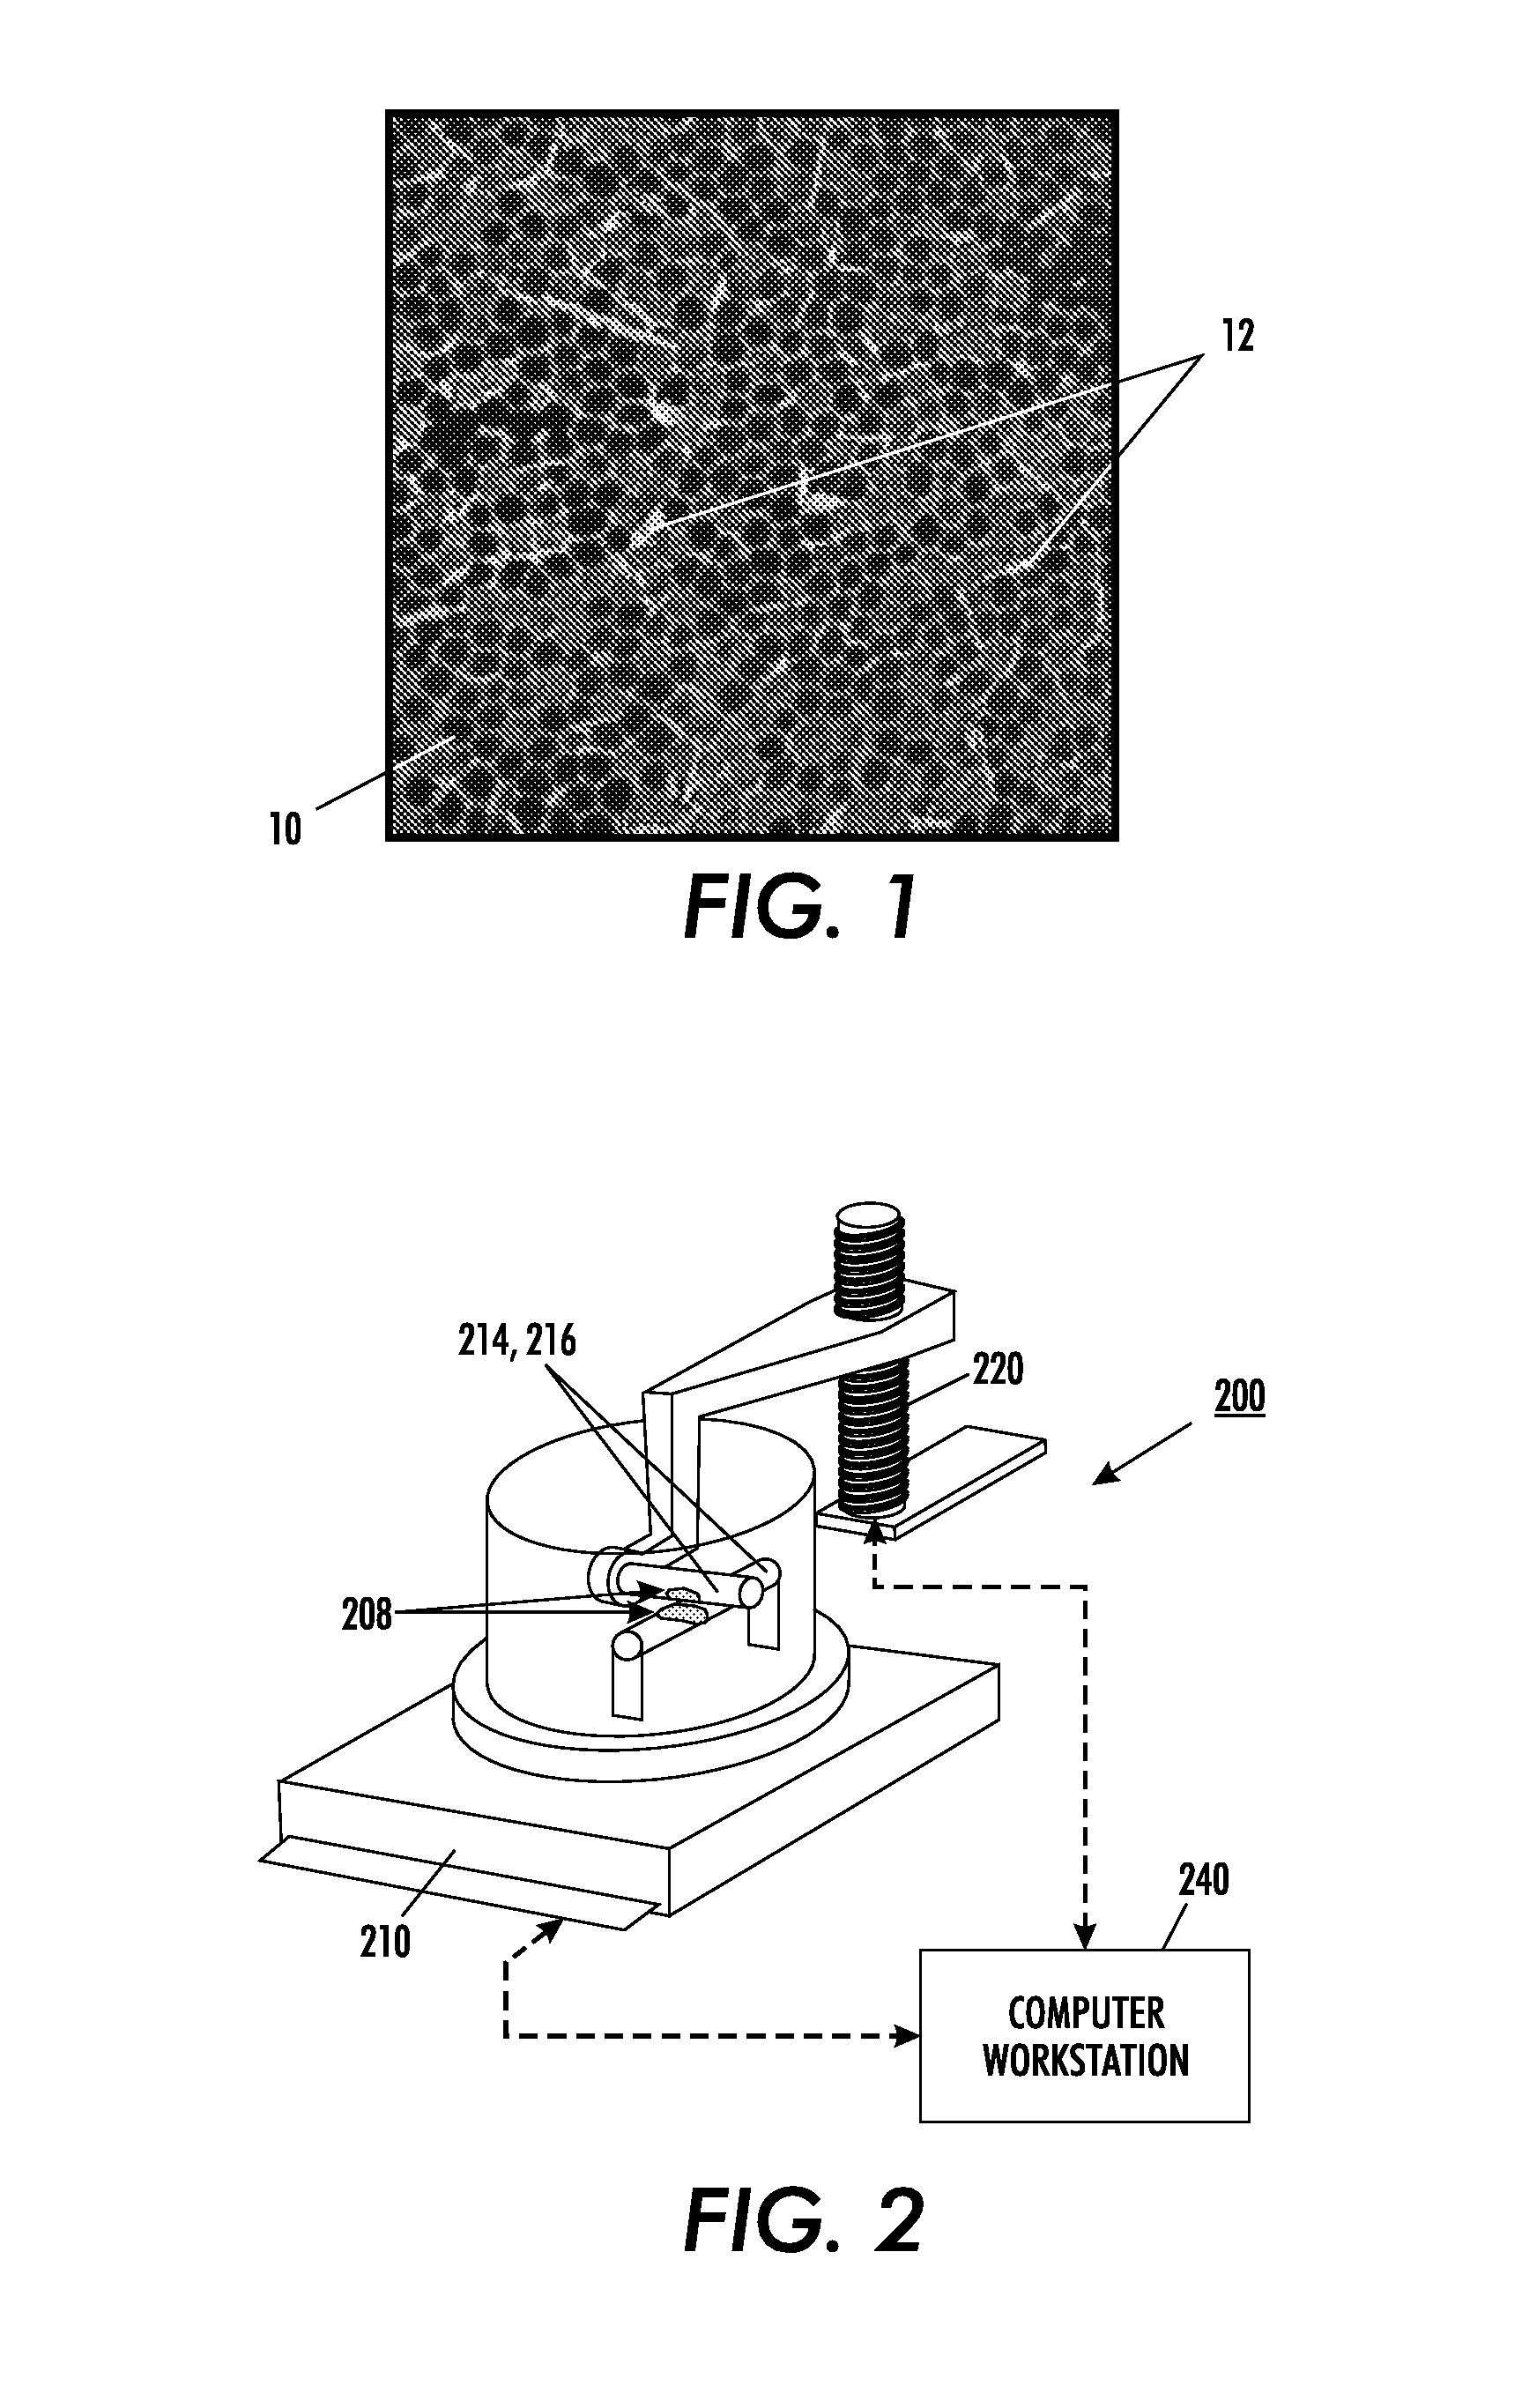 Polymeric adhesive including nanoparticle filler